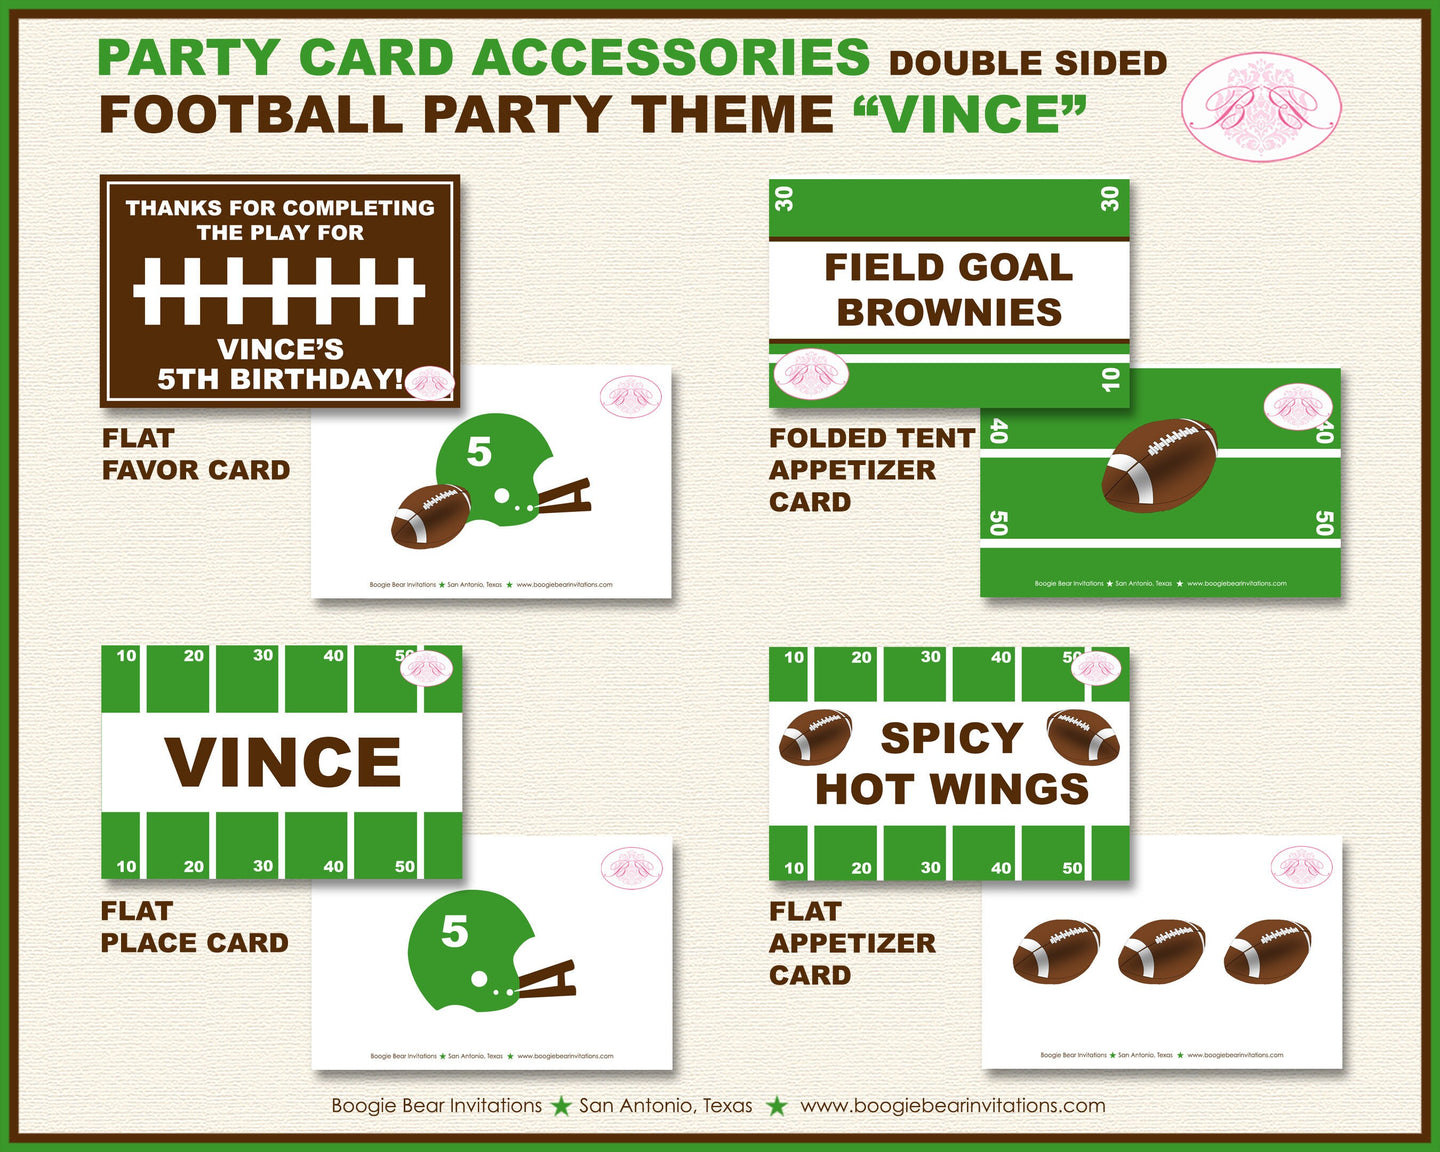 Football Birthday Party Favor Card Tent Appetizer Place Favor Sports Team Club Game Green Brown Boogie Bear Invitations Vince Theme Printed